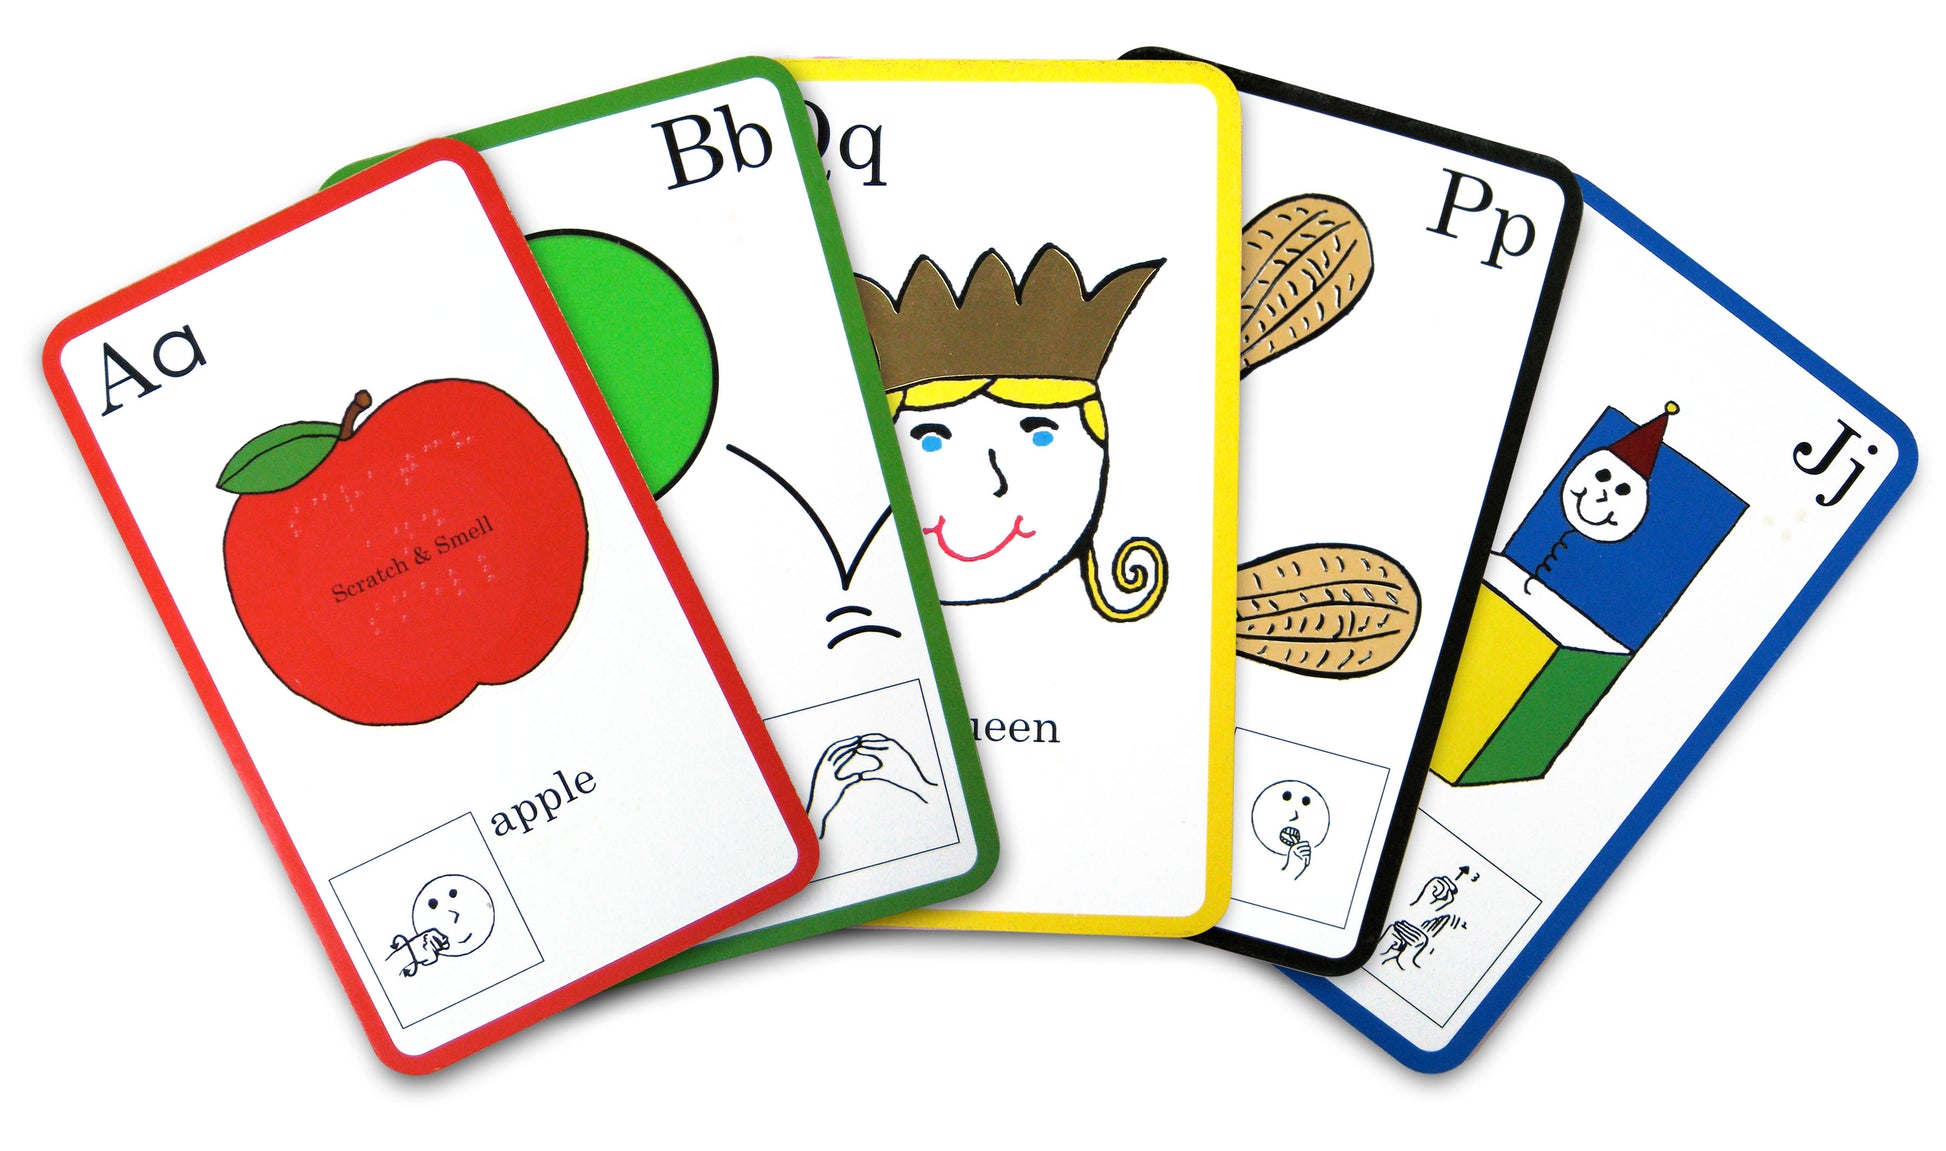 Sensational Alphabet Flash cards spread out showing different letters of the alphabet